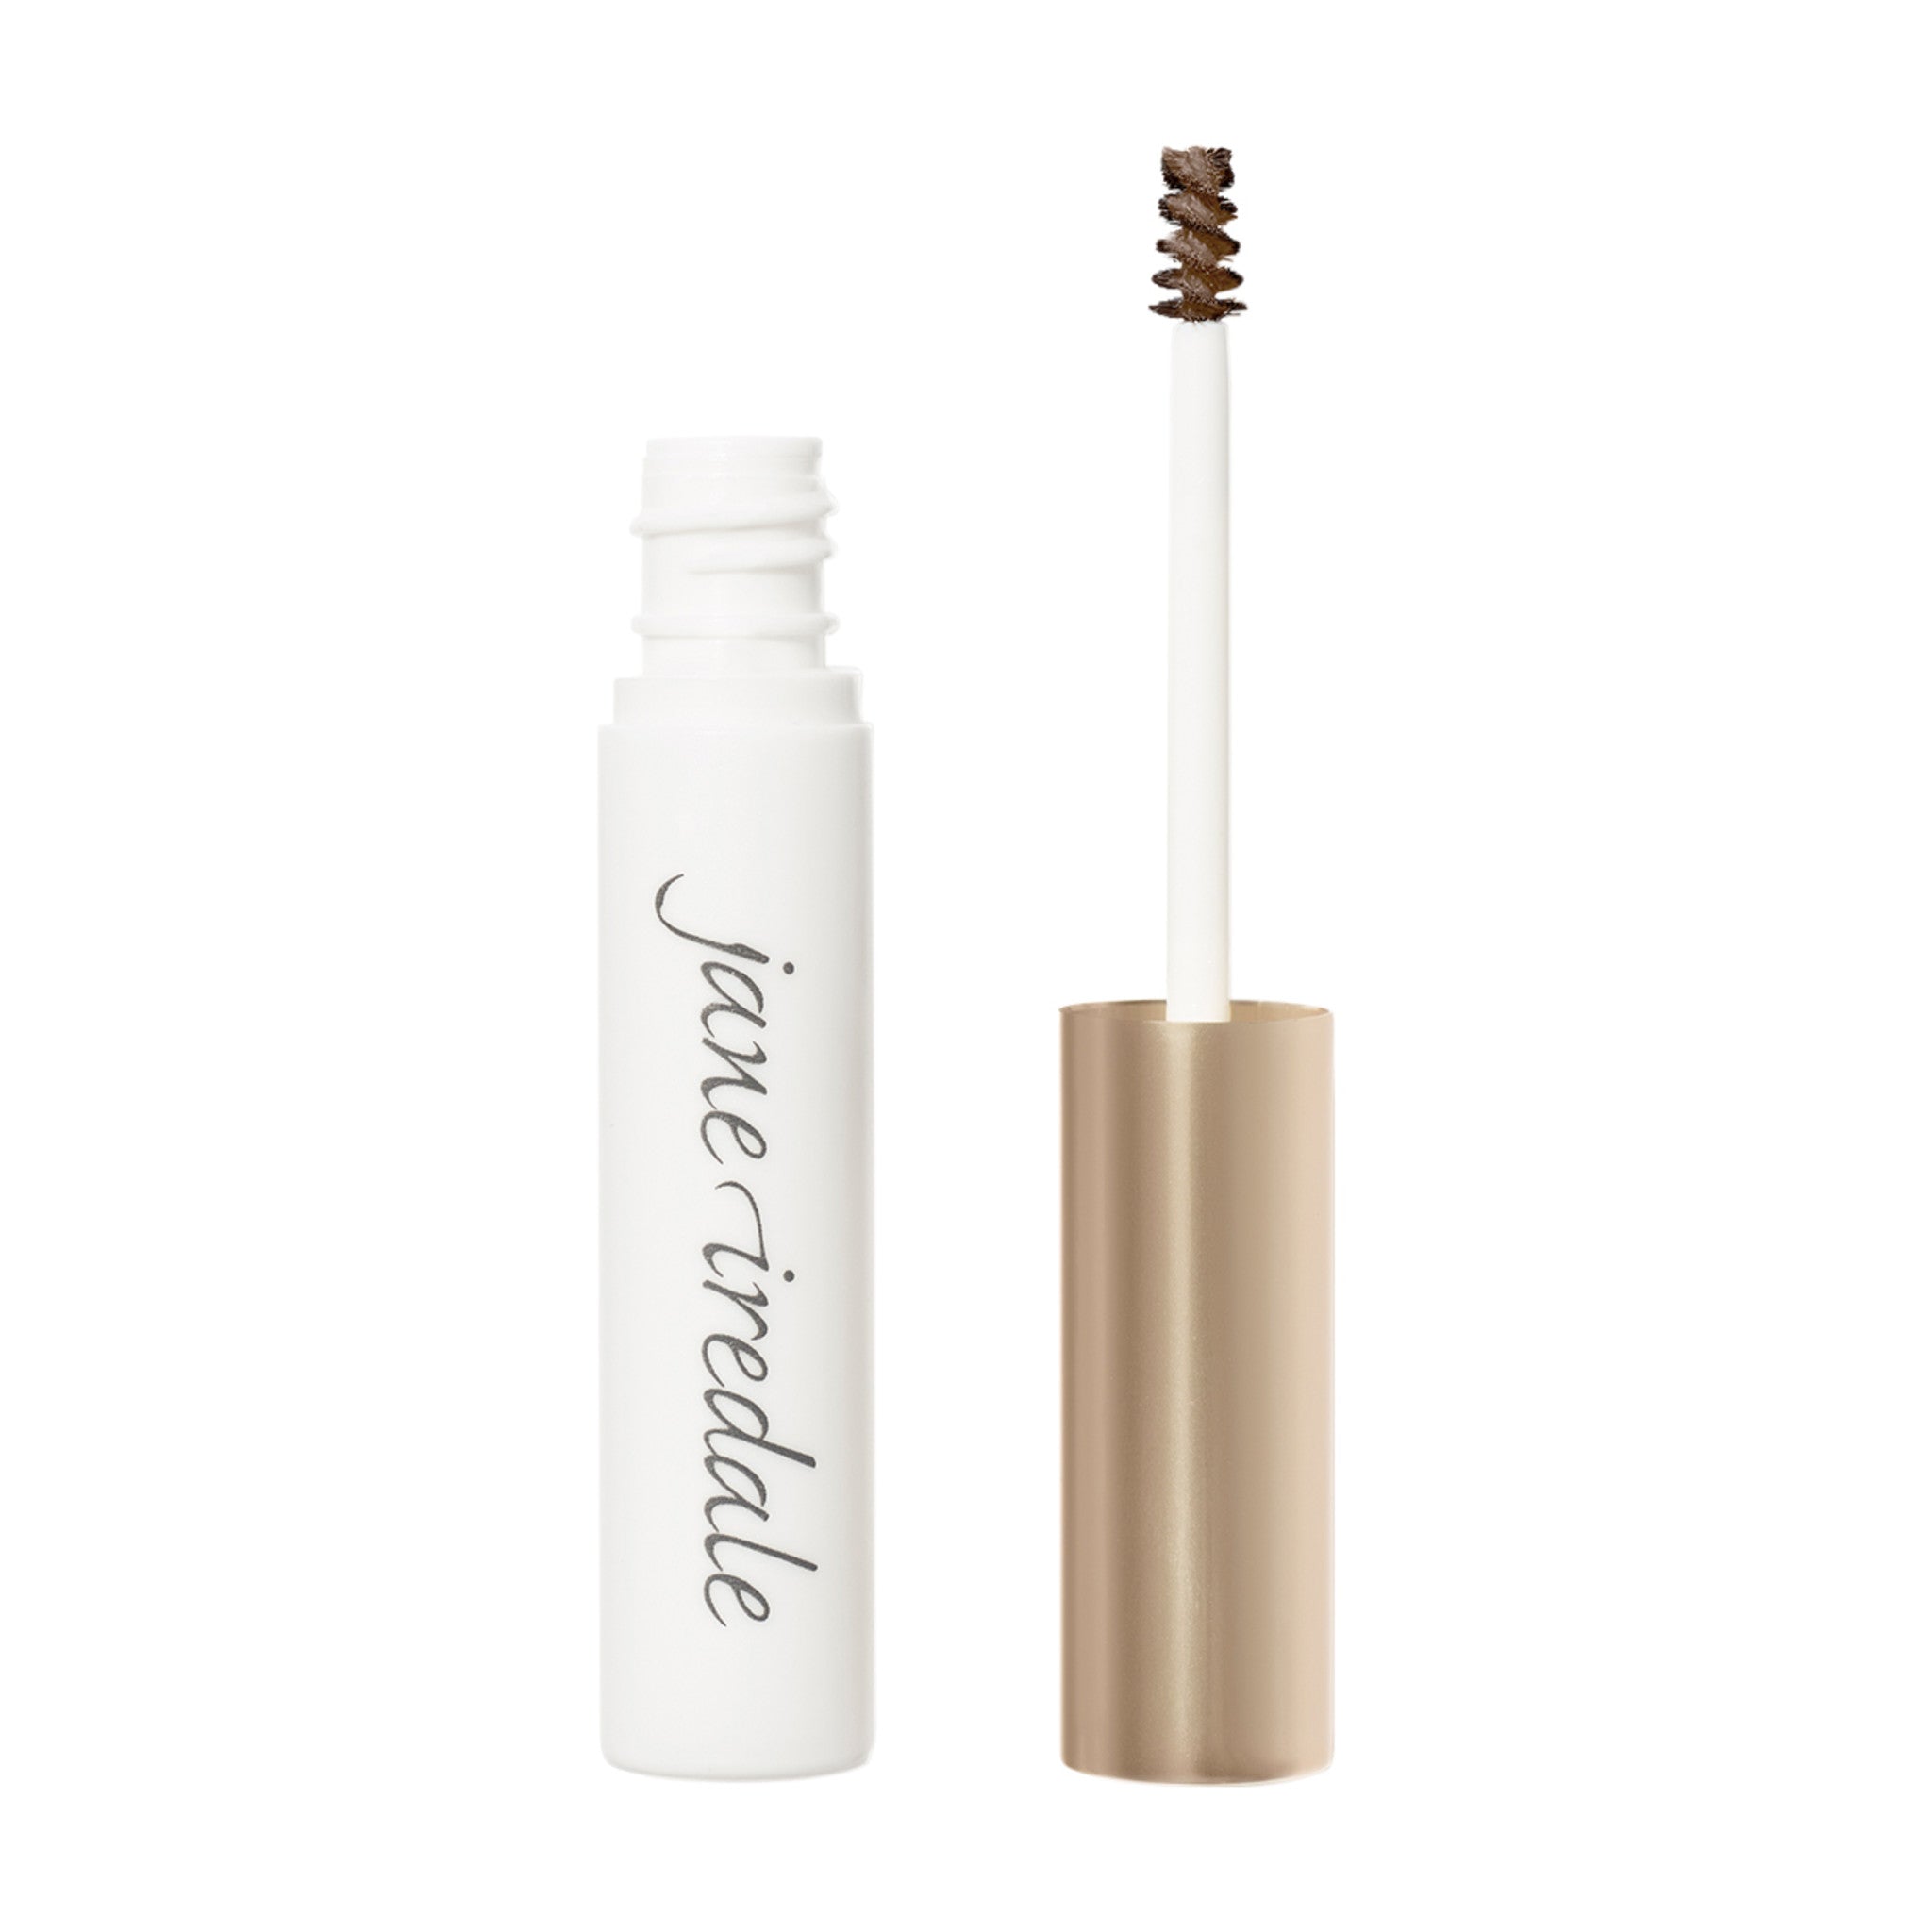 Jane Iredale PureBrow Brow Gel Color/Shade variant: Neutral Blonde main image. This product is in the color yellow